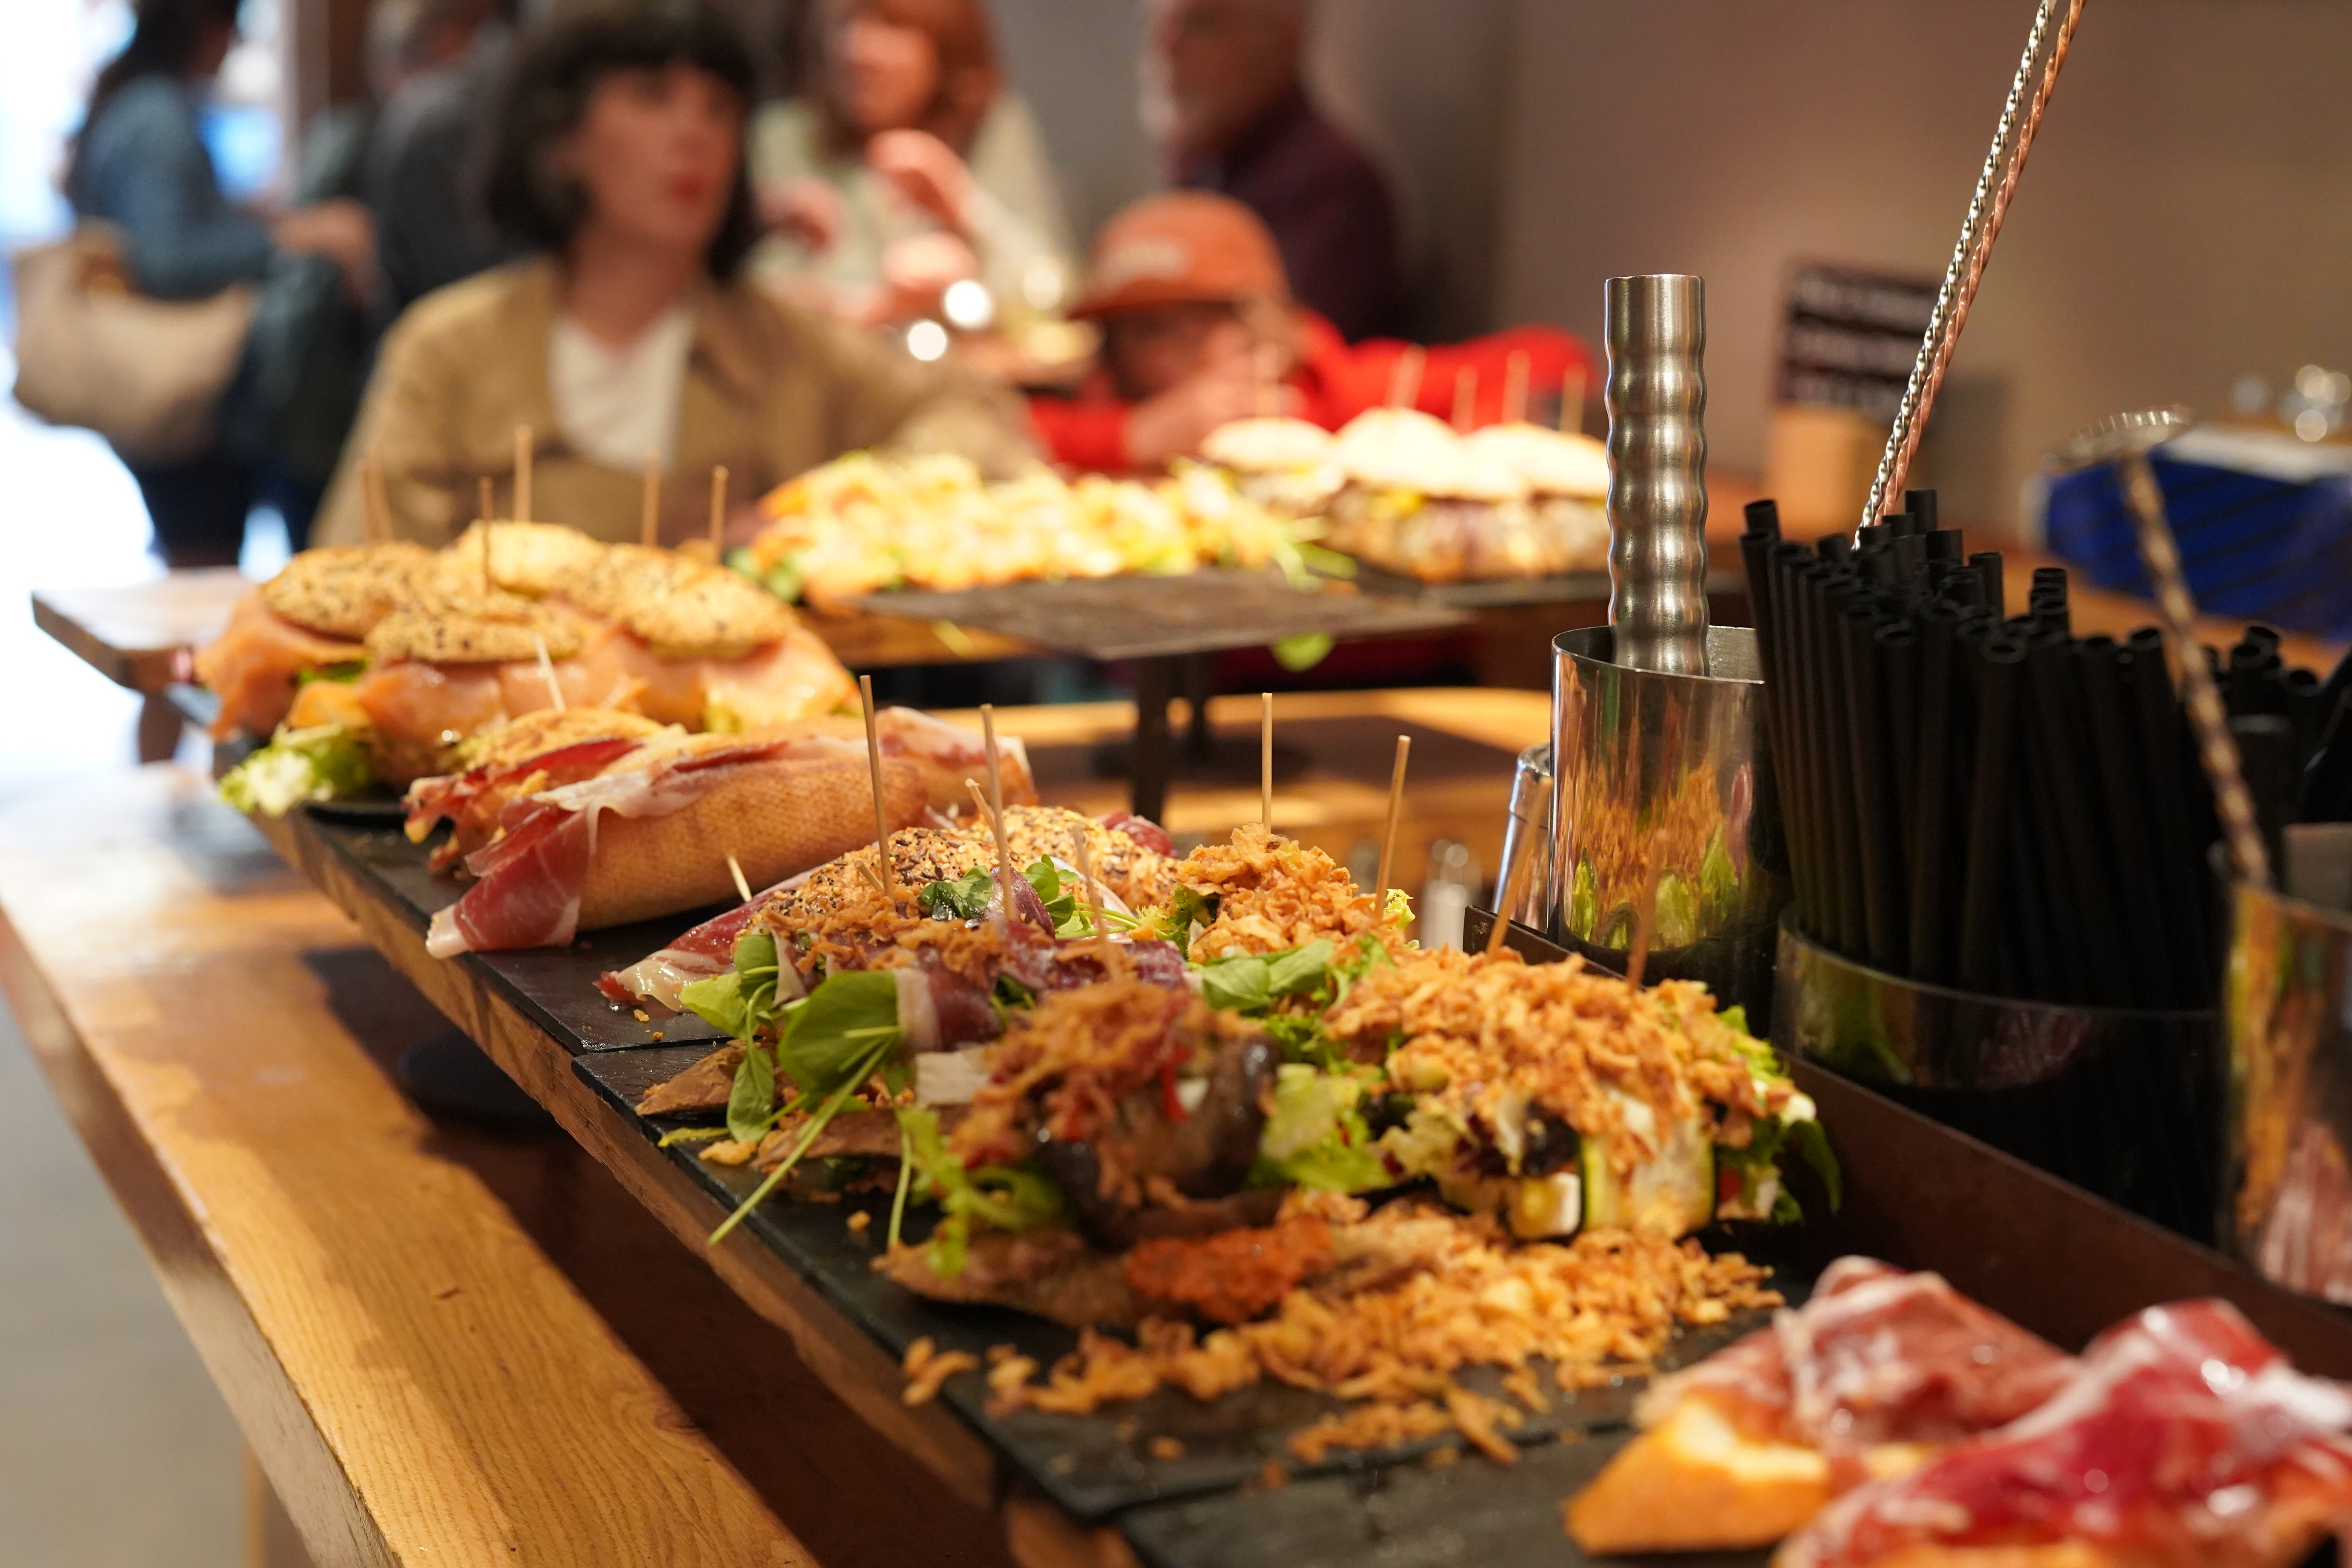 7 keys to enjoy the experience of going out for pintxos